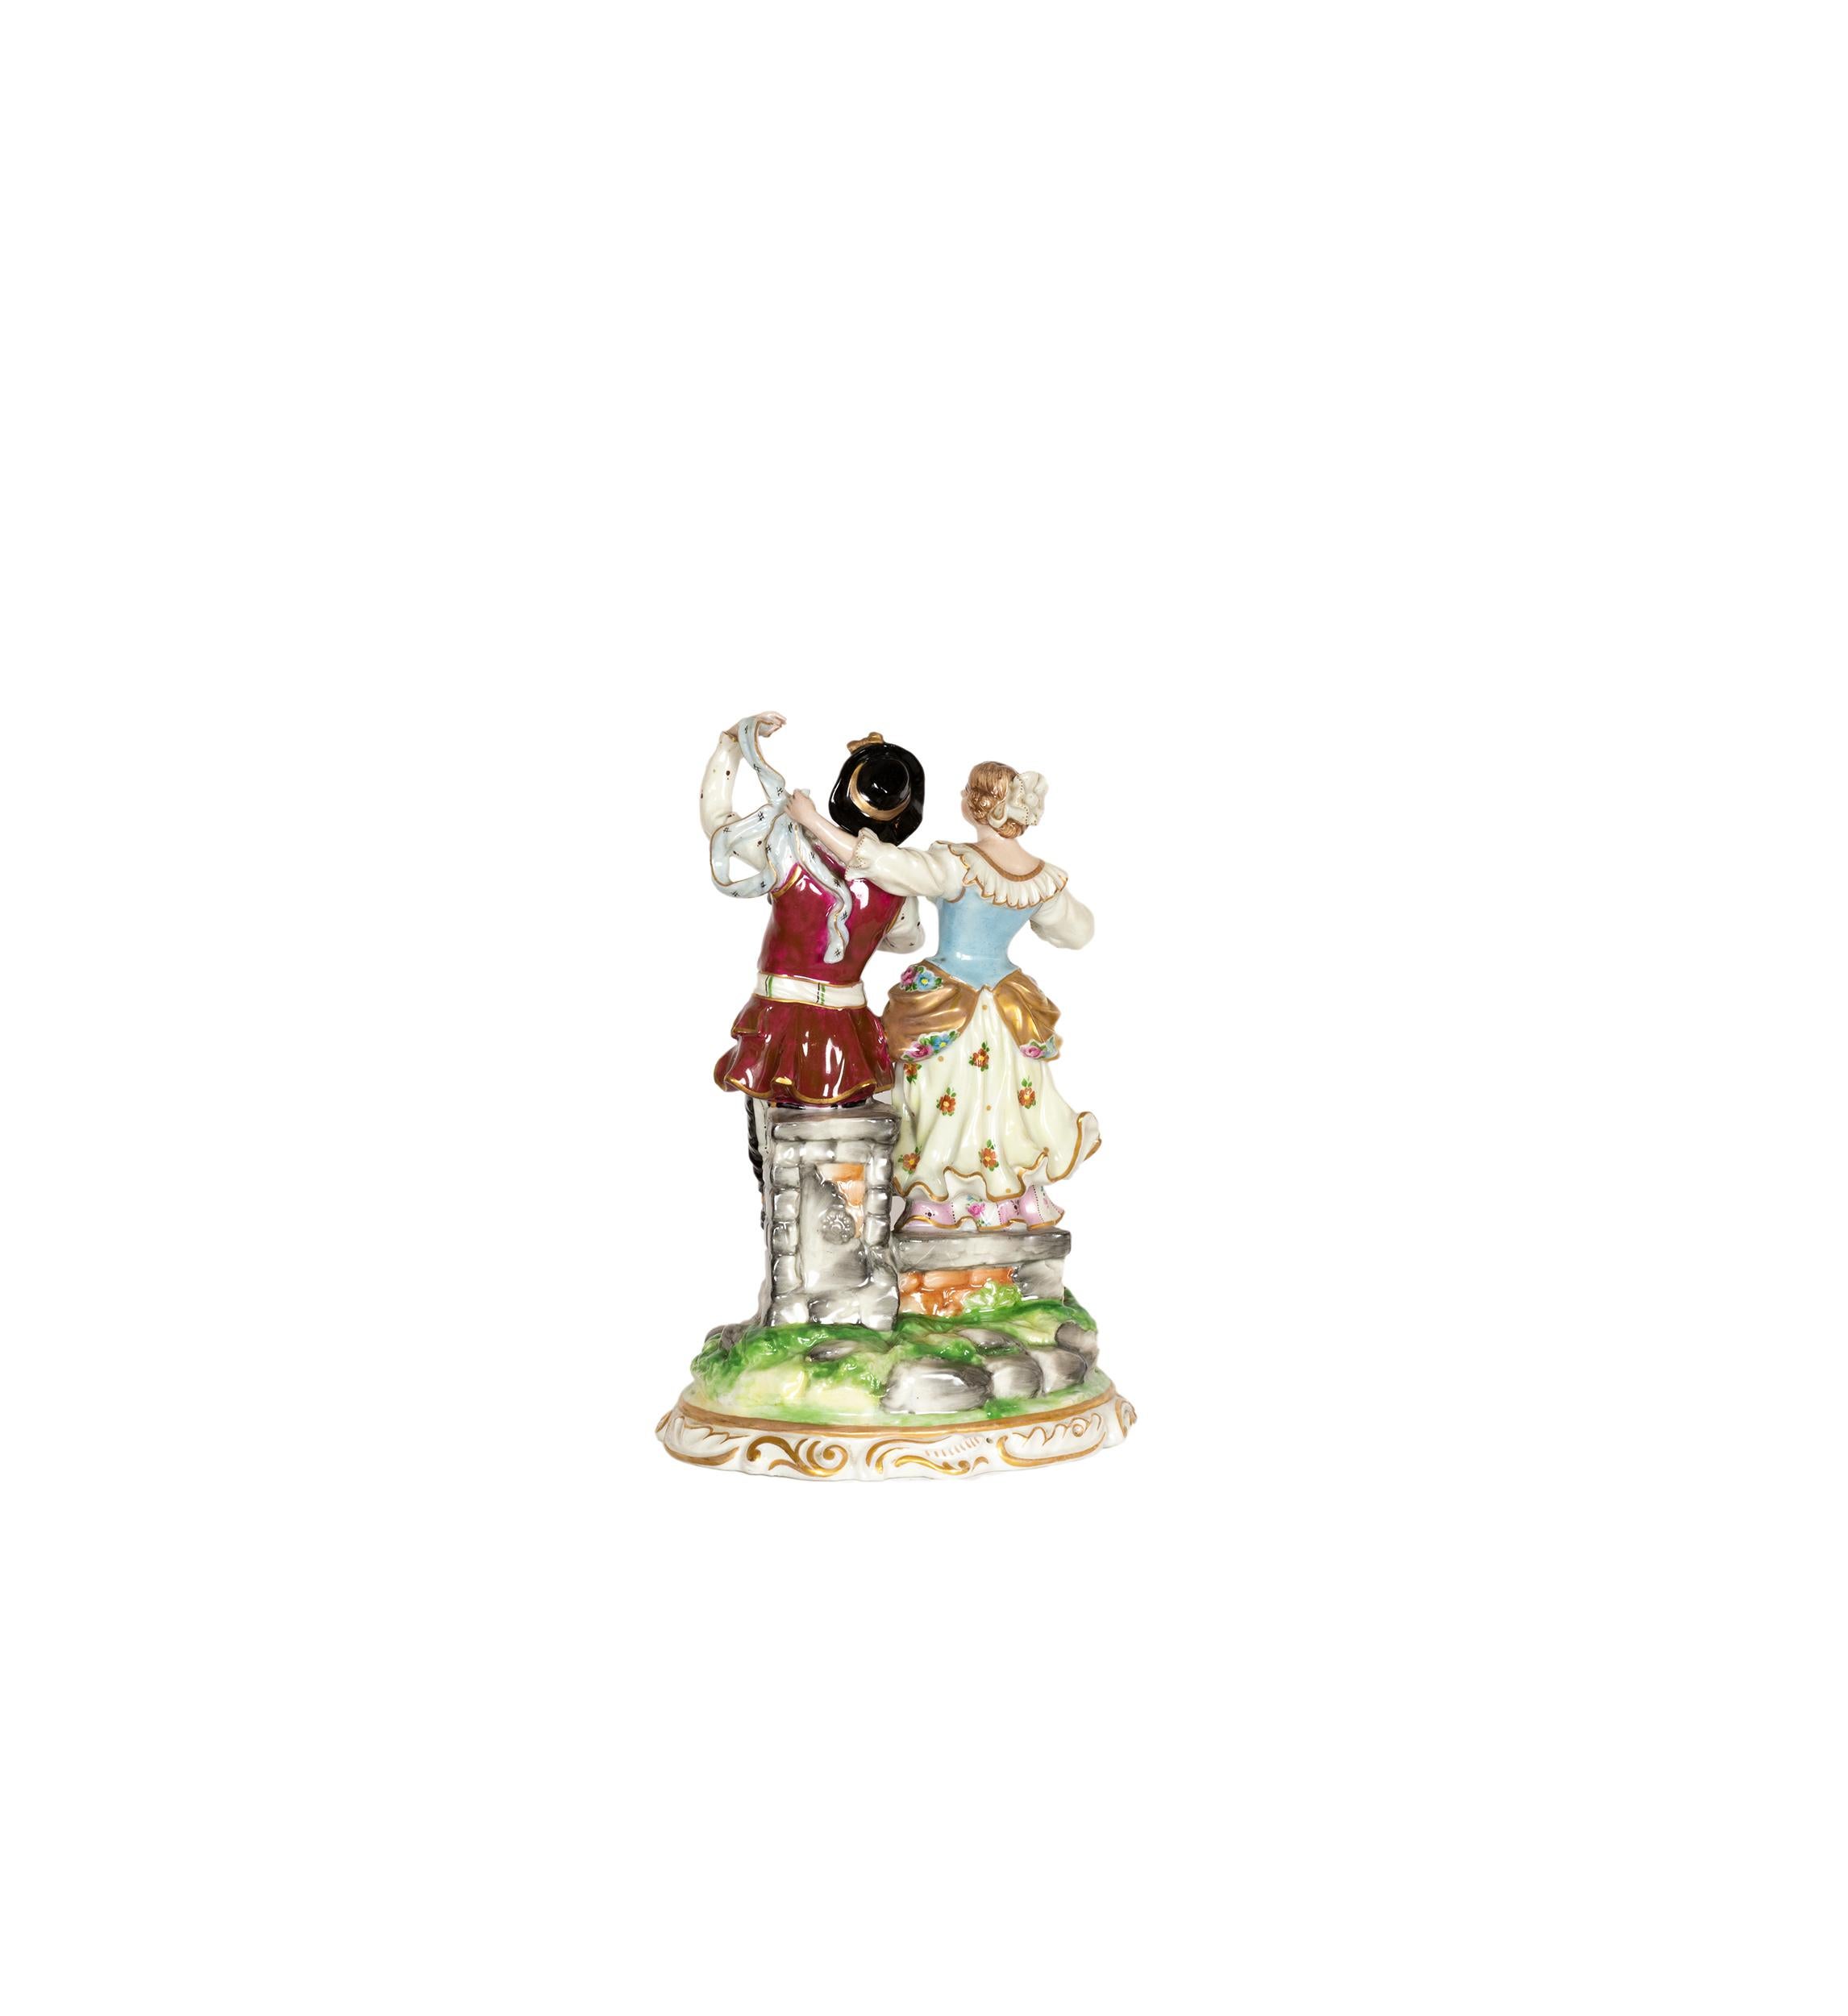 Baroque Late 18th Century dancing couple figurine by Volksted For Sale